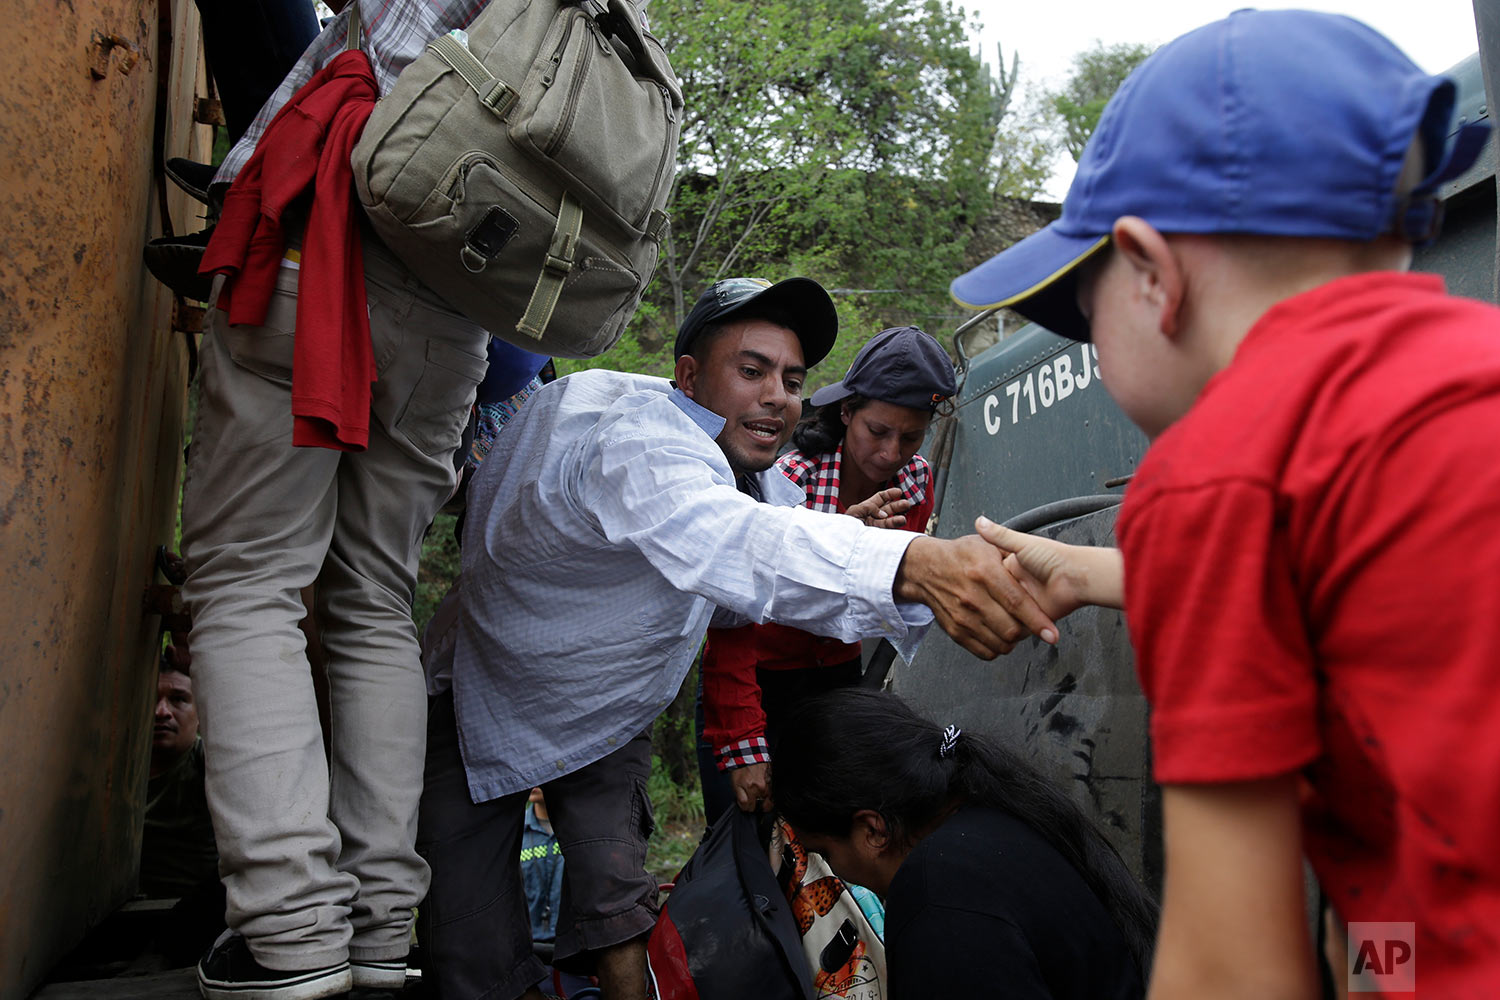  Honduran migrants walking to the U.S. climb on to the space between the cab and bed of a trailer in Zacapa, Guatemala, Wednesday, Oct. 17, 2018. (AP Photo/Moises Castillo) 